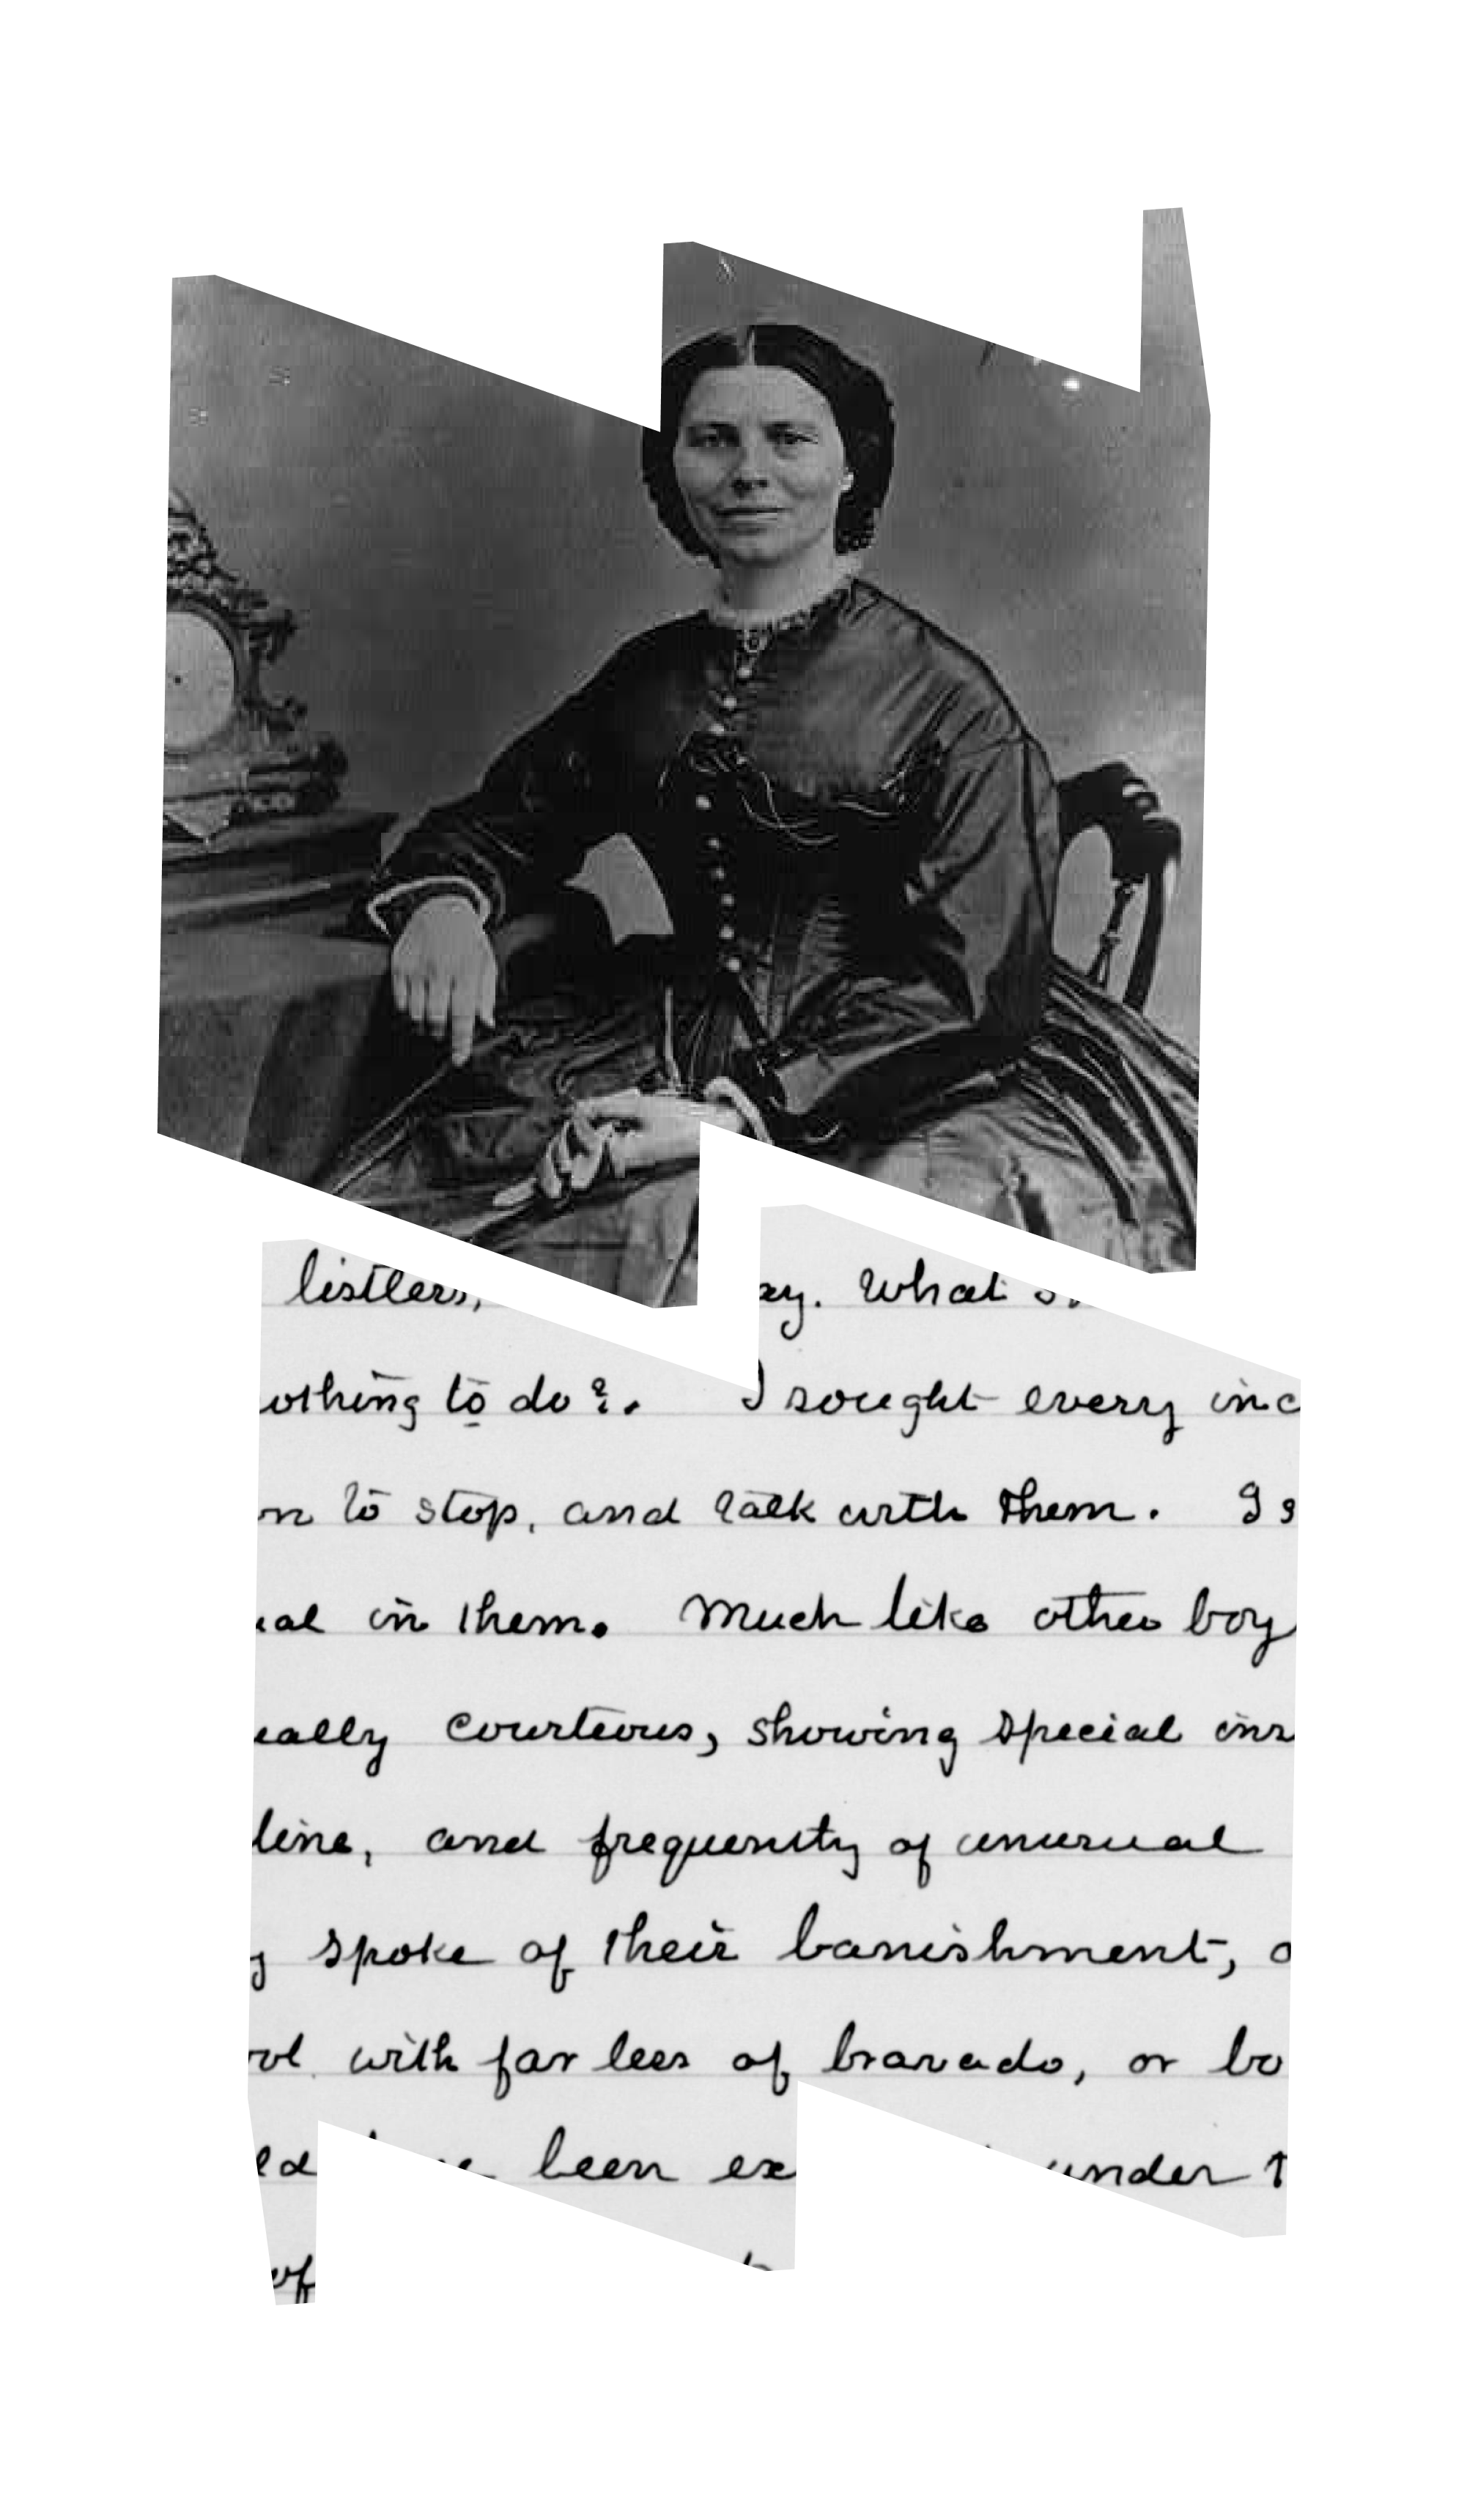 In top "W" frame, a black and white image of Clara Barton, seated. In bottom "M" frame, Clara's writing in cursive. 